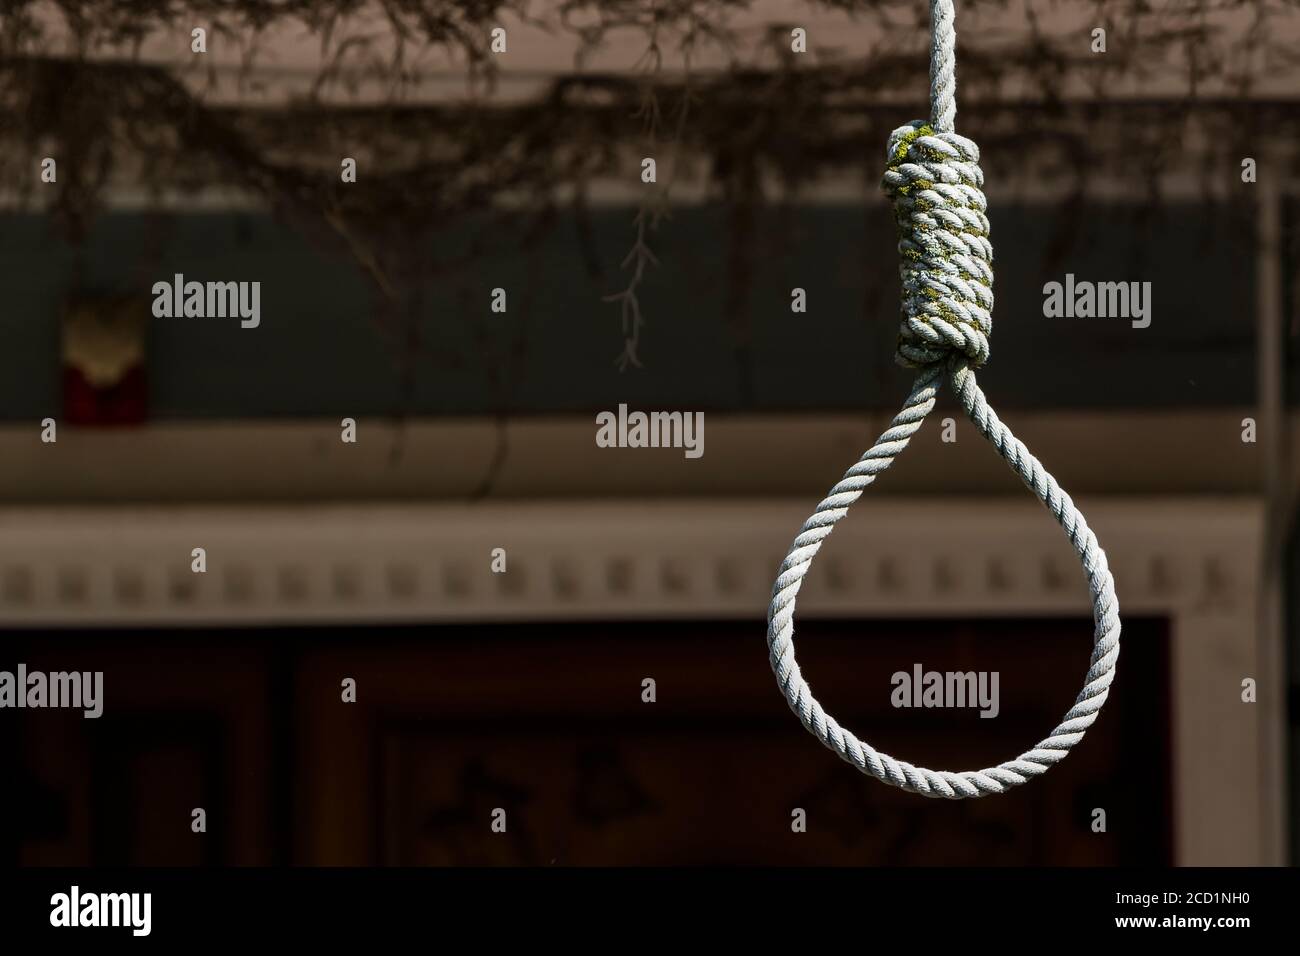 Rope loop or gallows on a dark background. Stock Photo